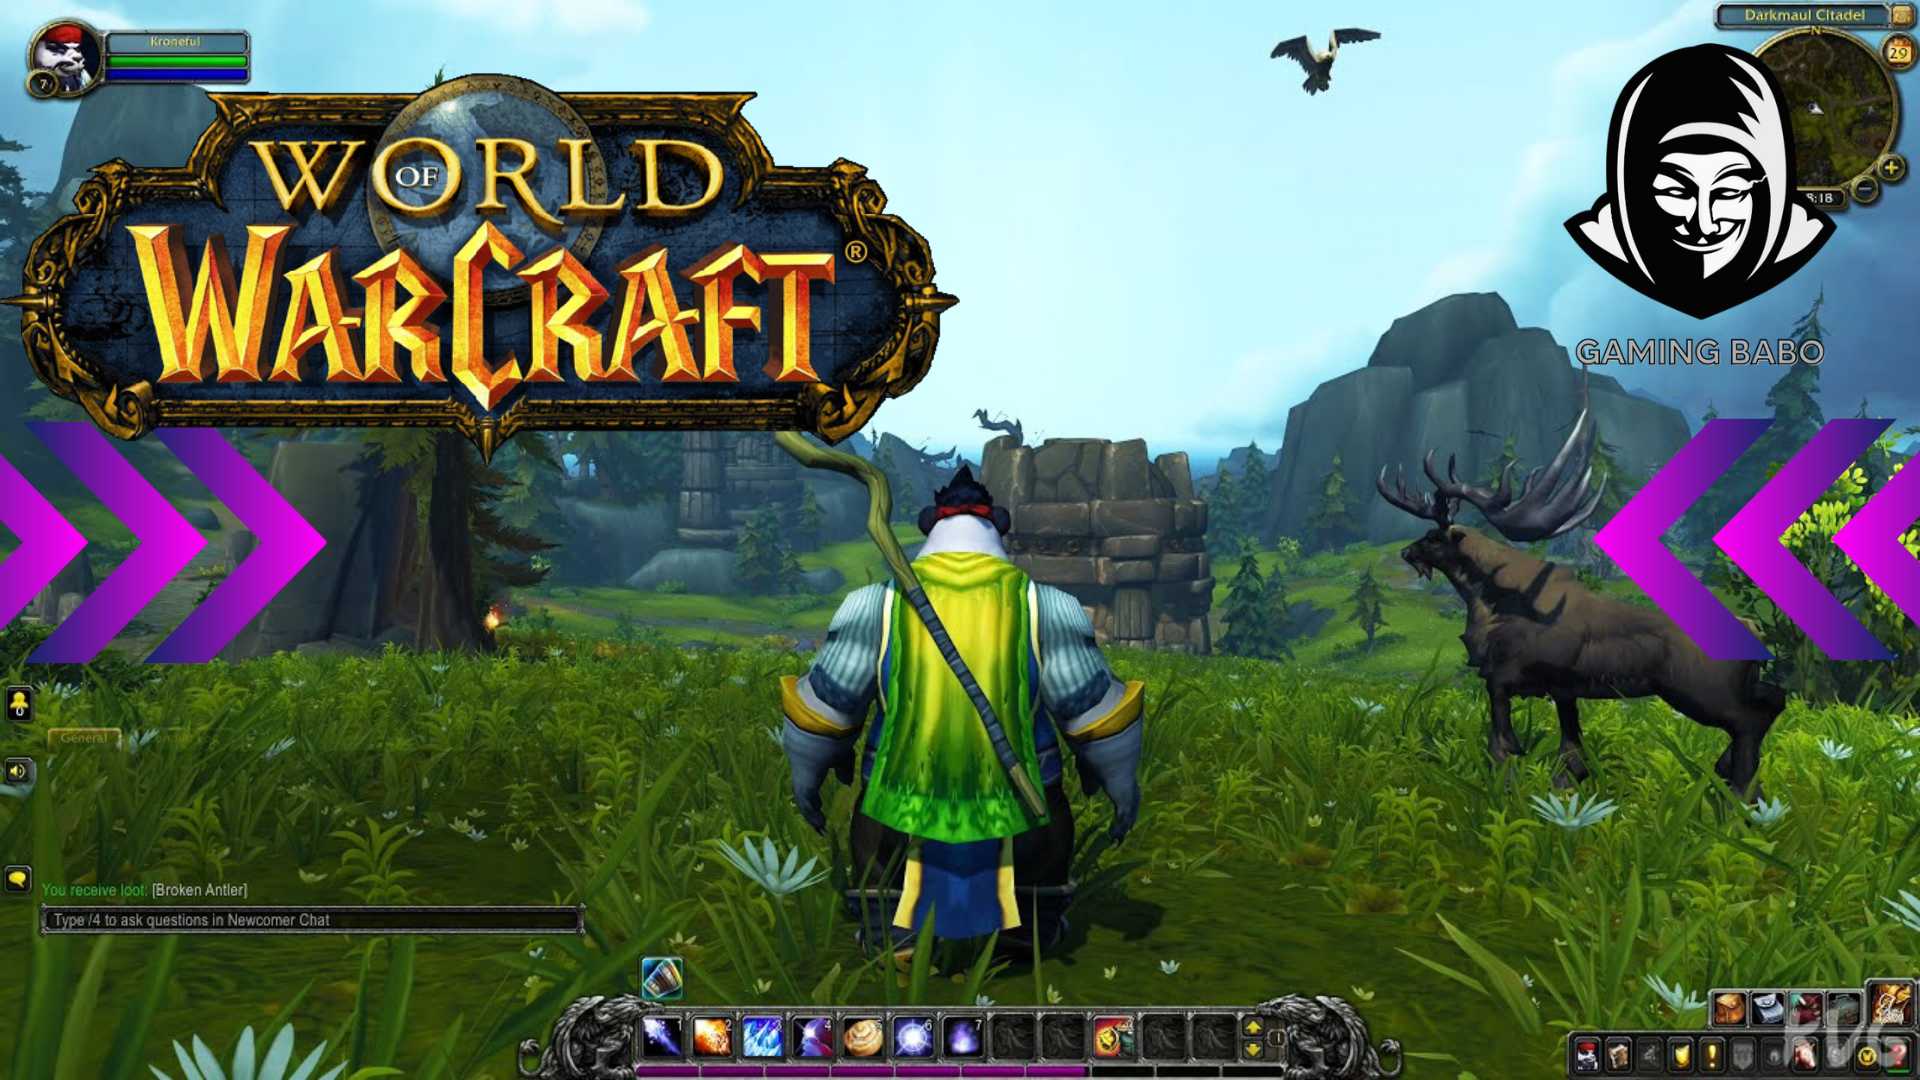 World of Warcraft tips and tricks